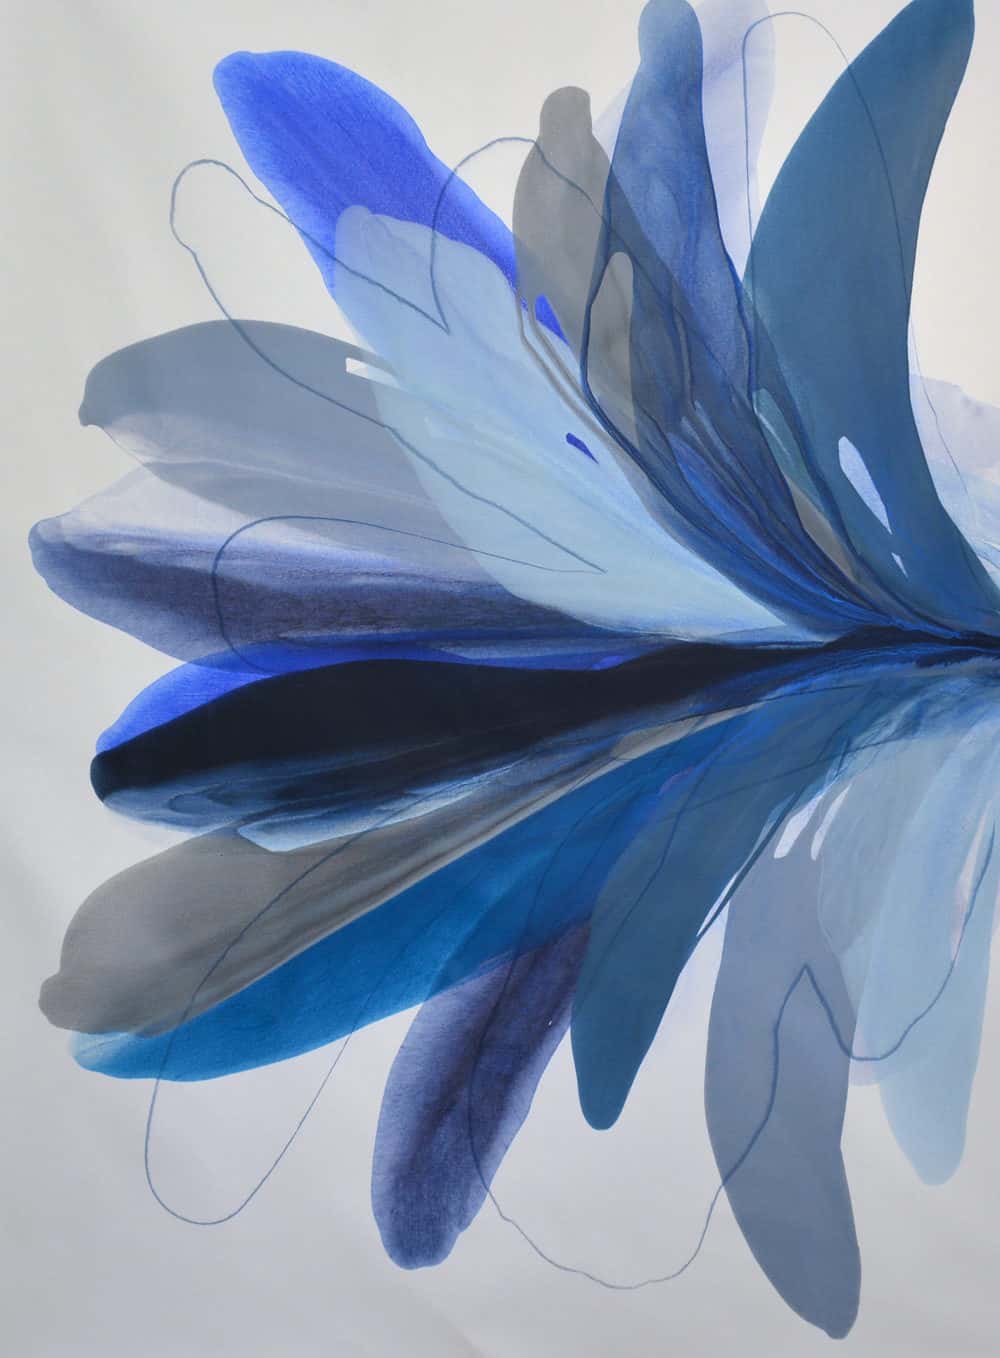 Buy a painting of a blue flower called Lakeside 9, You Center Me 1